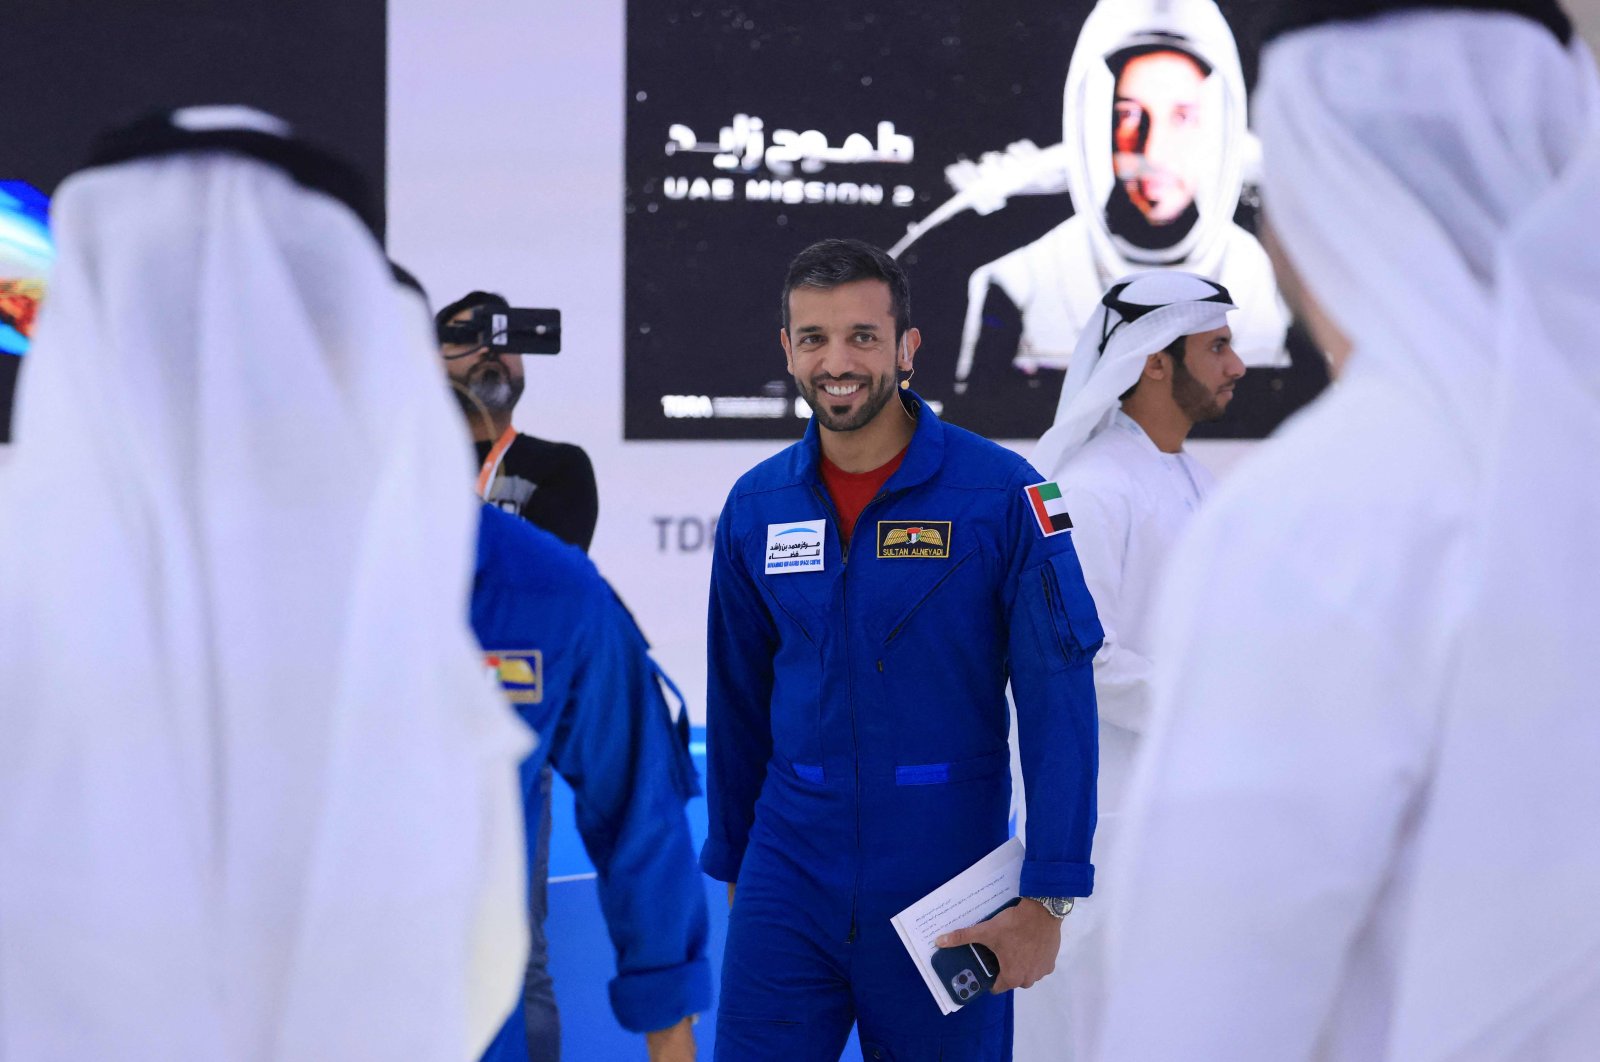 UAE astronaut Sultan AlNeyadi arrives for a news conference at the Museum of the Future in the Gulf emirate of Dubai, on Feb. 2, 2023. (AFP Photo)